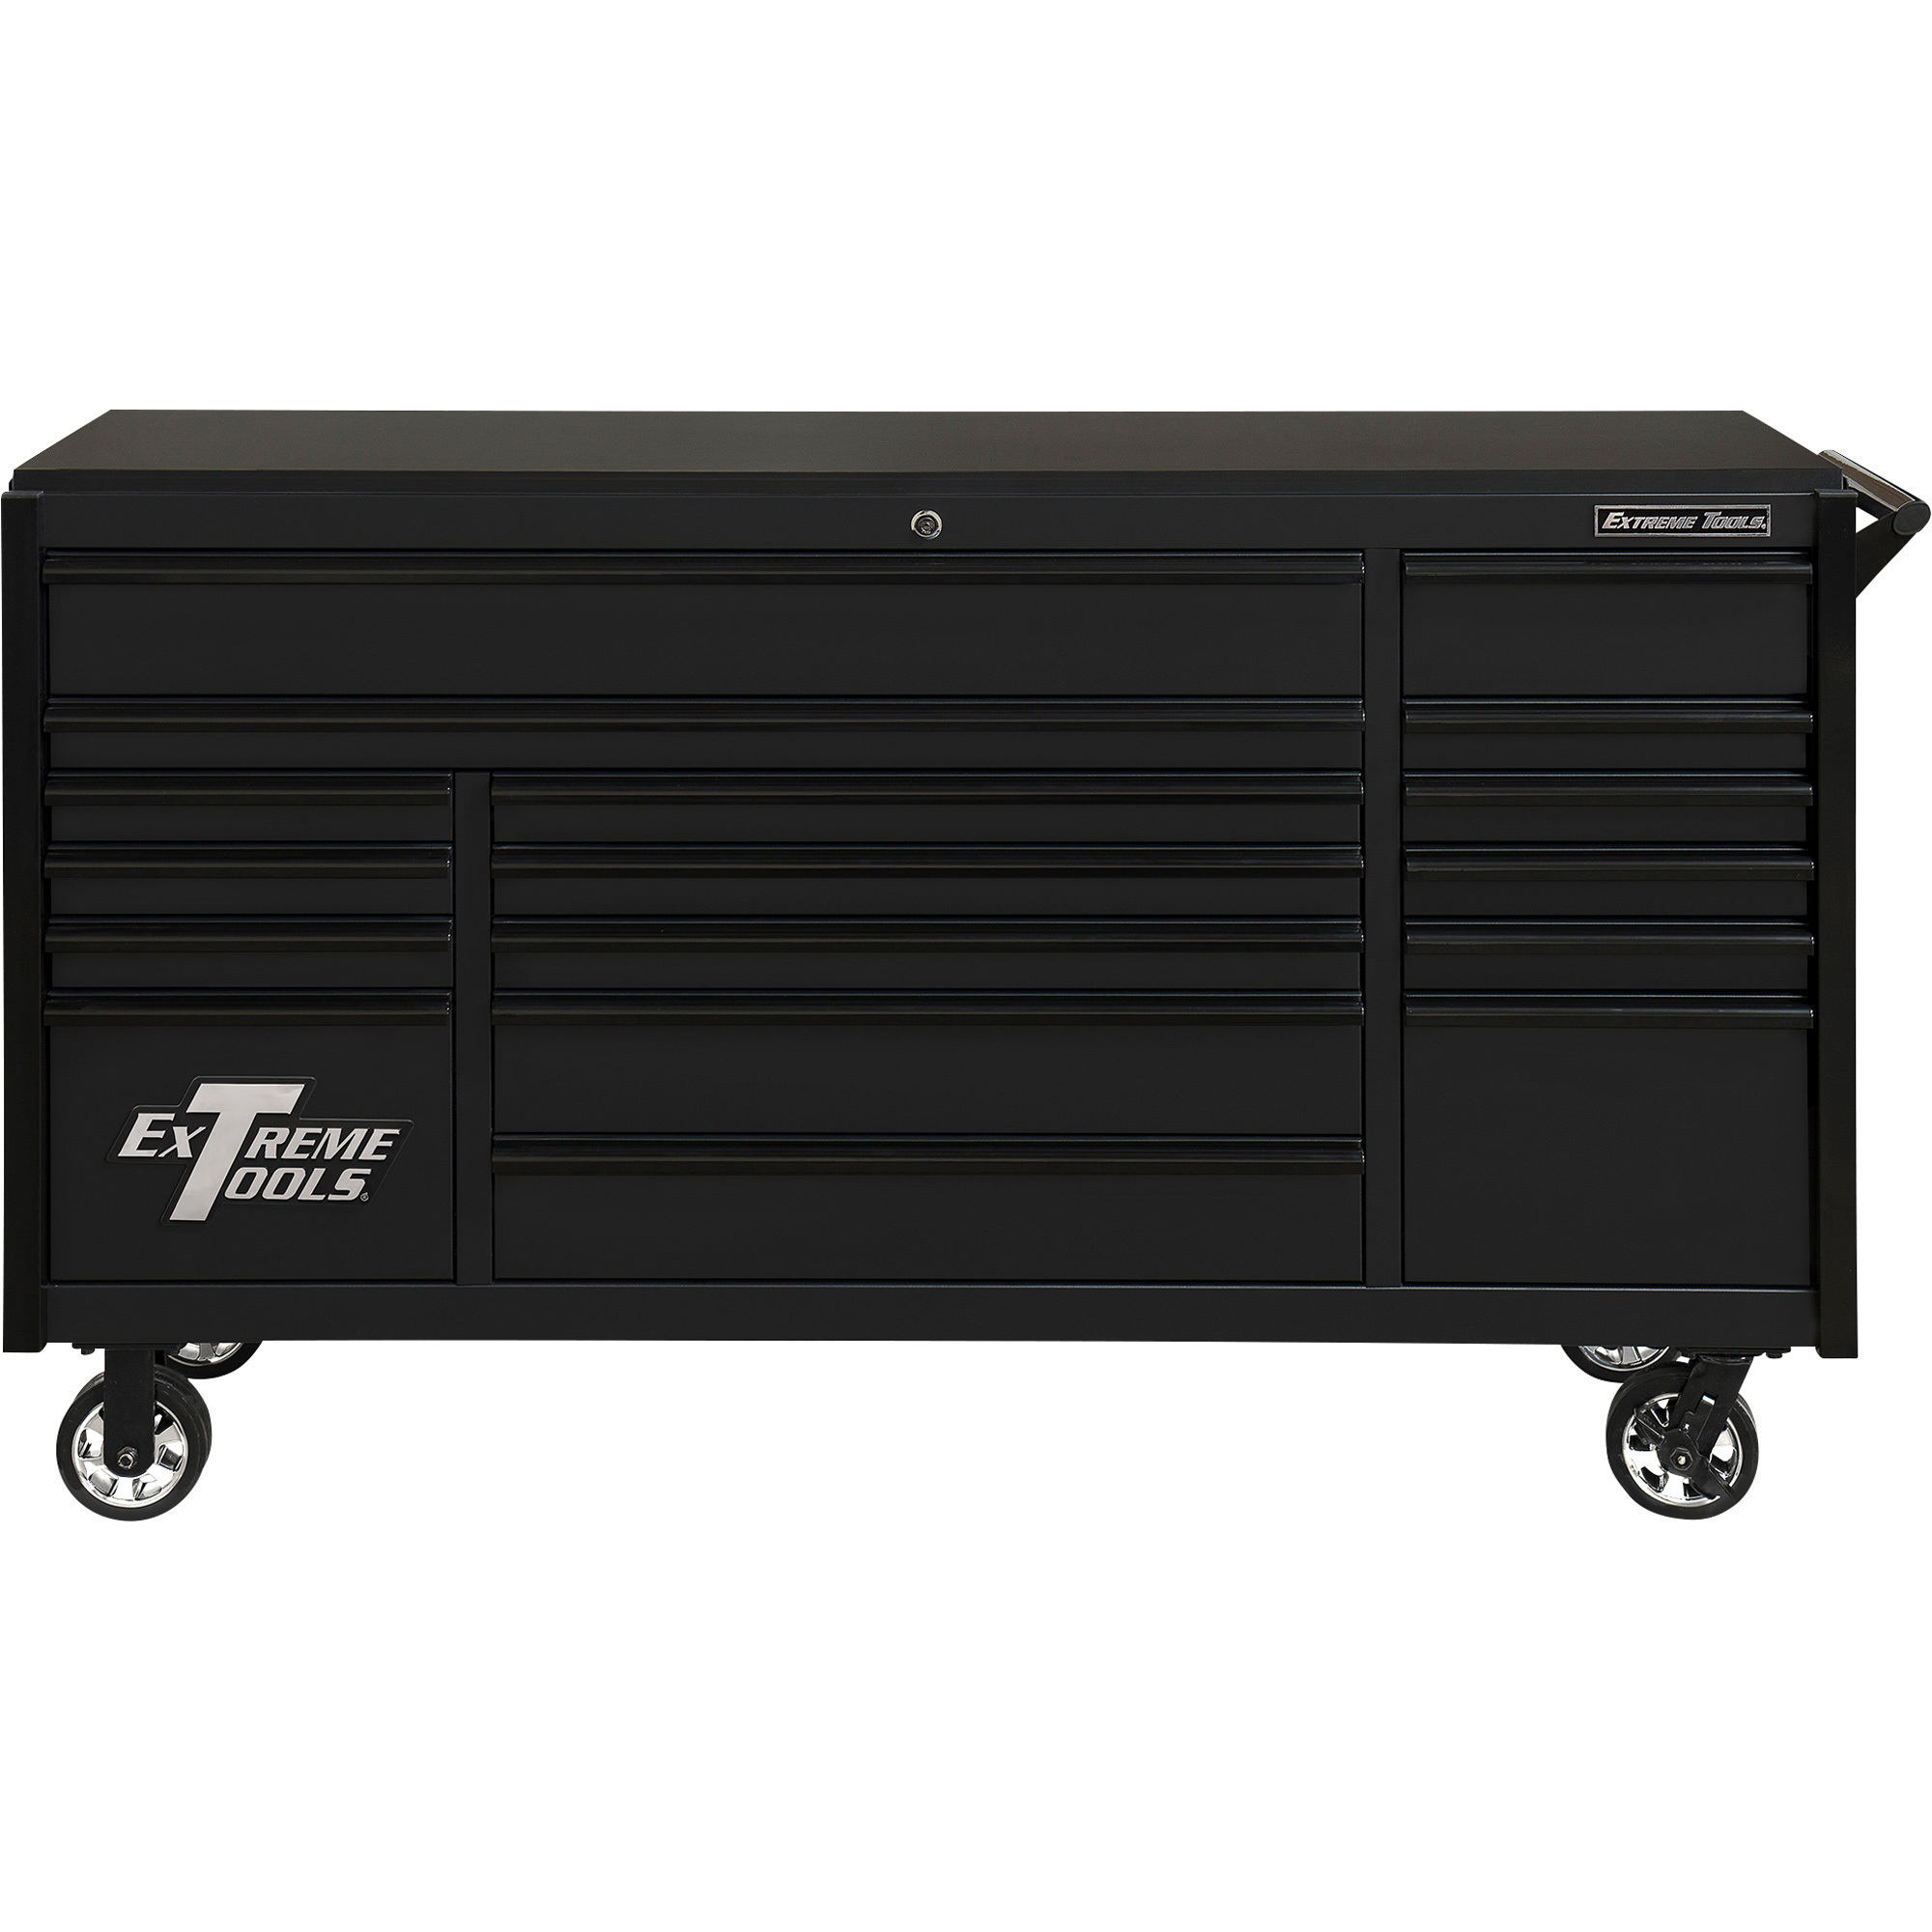 DX Series 72Inch 17-Drawer Triple Bank Roller Cabinet — 72Inch W x 21Inch D x 42.7Inch H, Matte Black/Black, Model - Extreme Tools DX722117RCMBBK